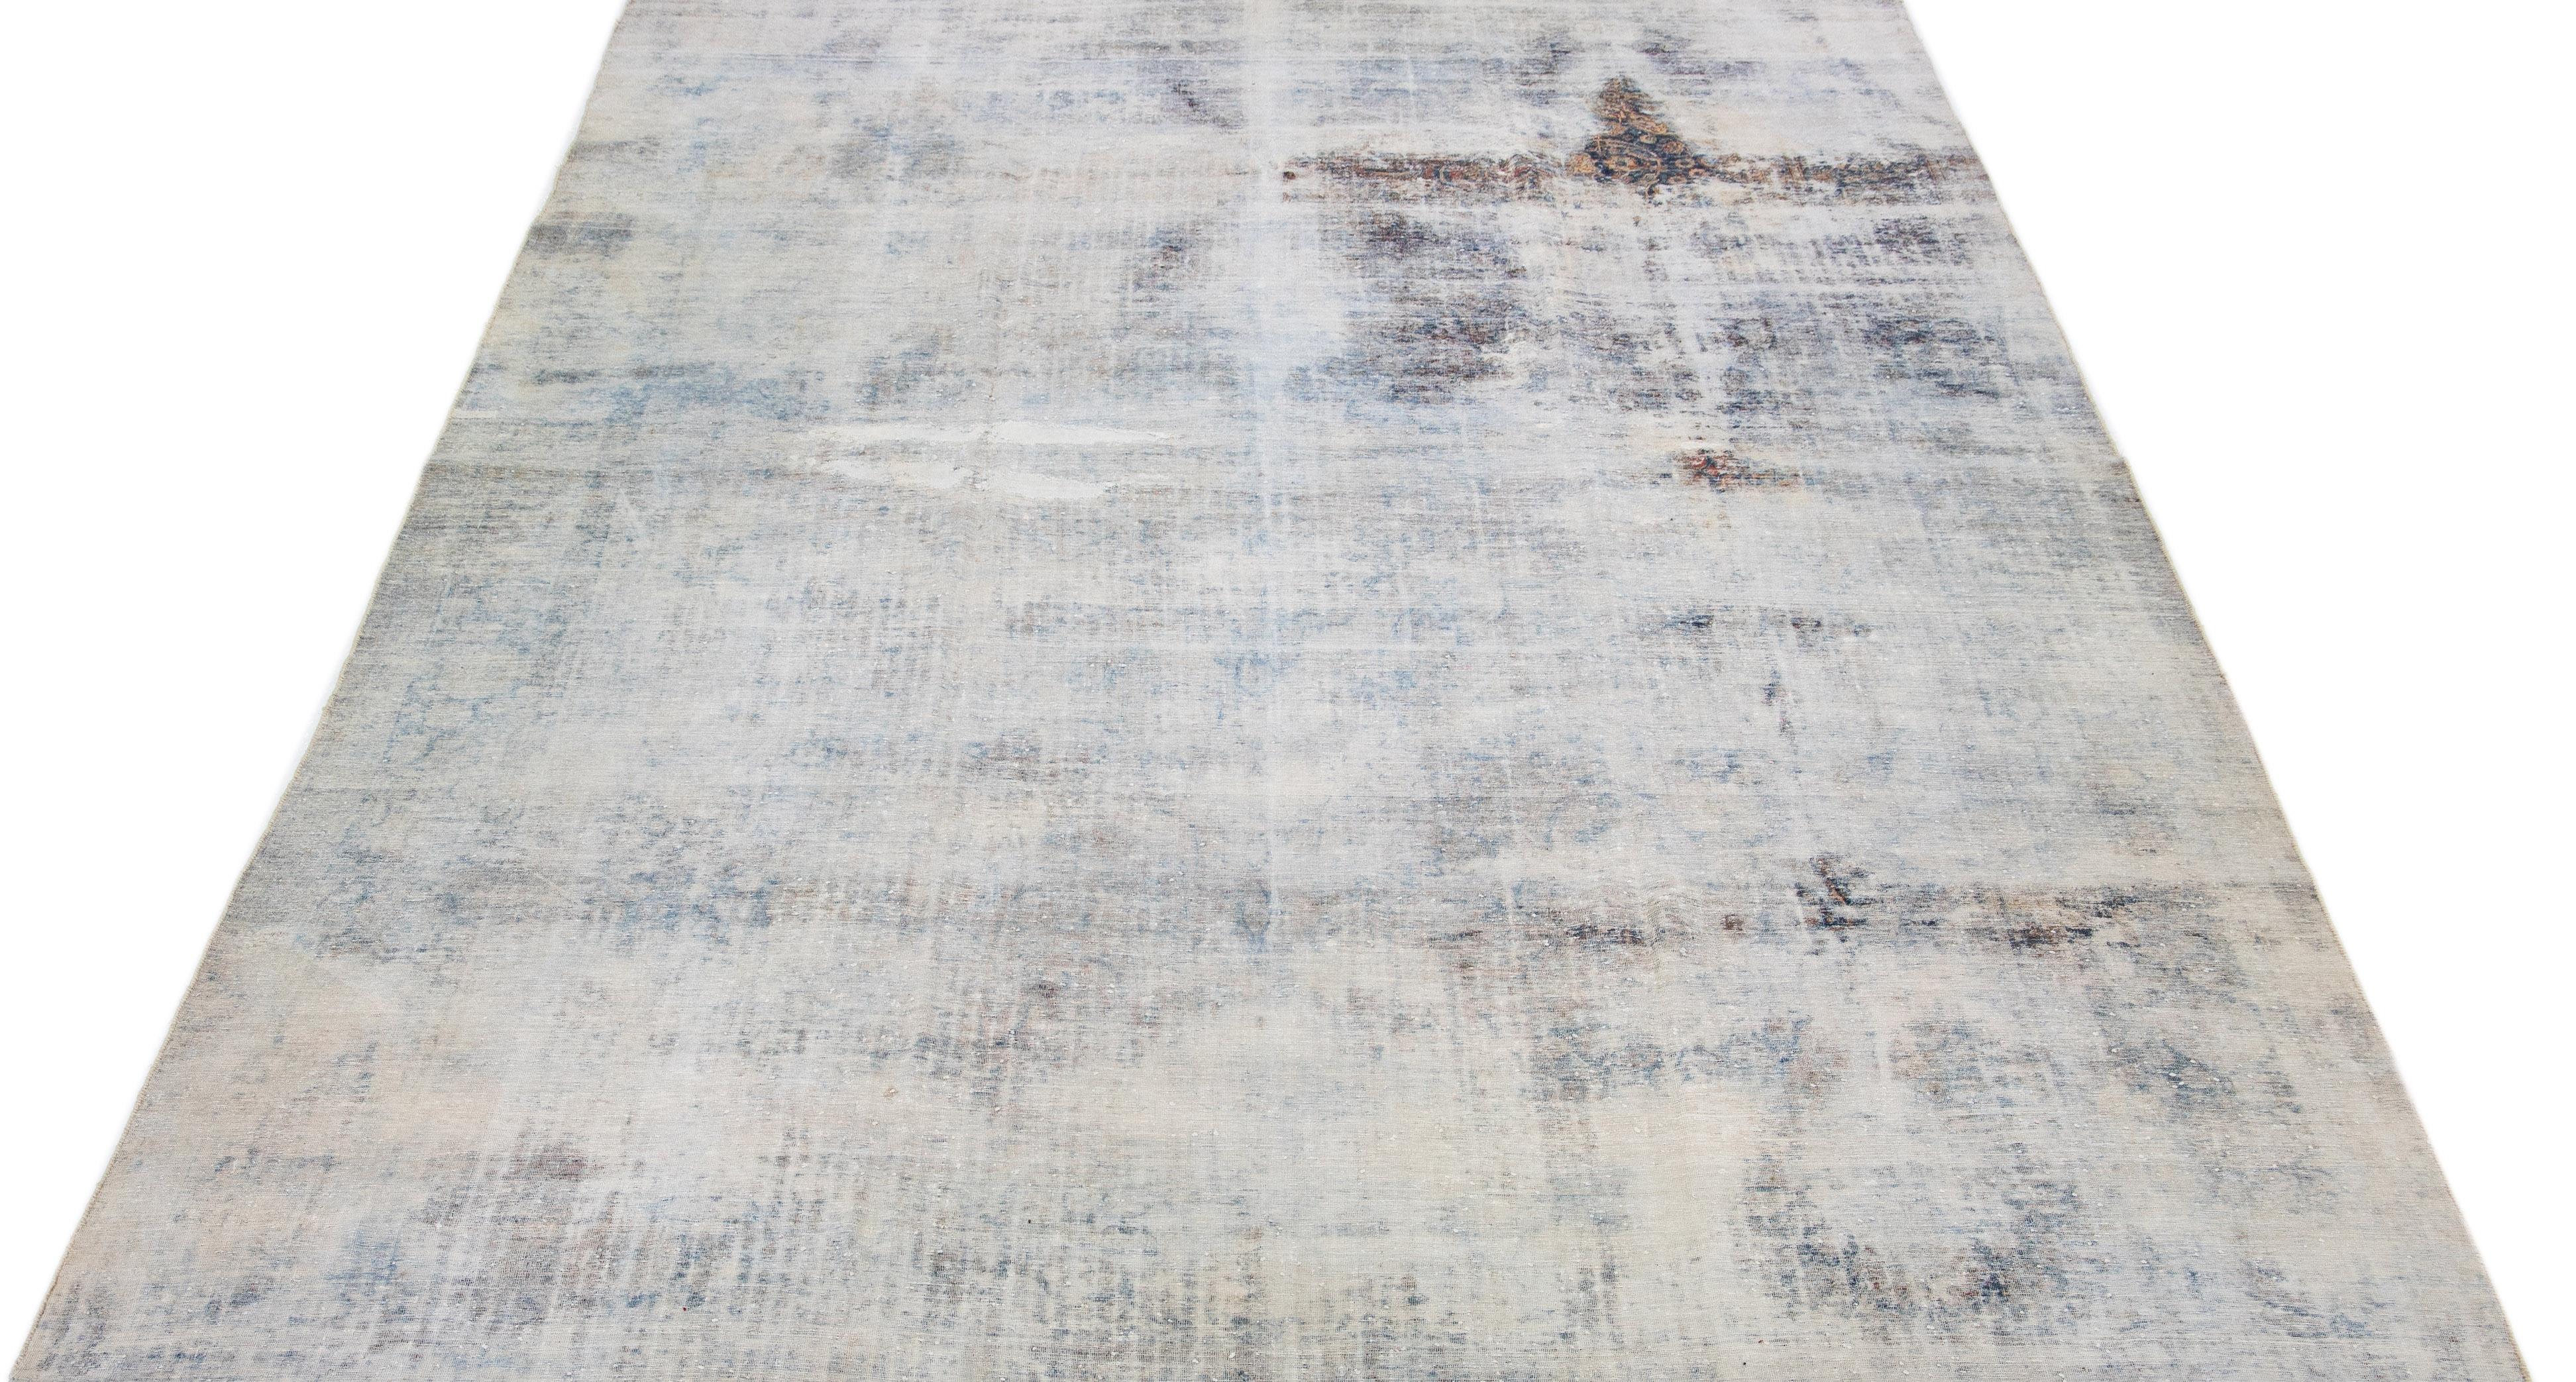 A classic hand-woven Kerman rug with an intricate all-over pattern displayed on a neutral beige backdrop alongside charming blue tones.

This rug measures 10'3